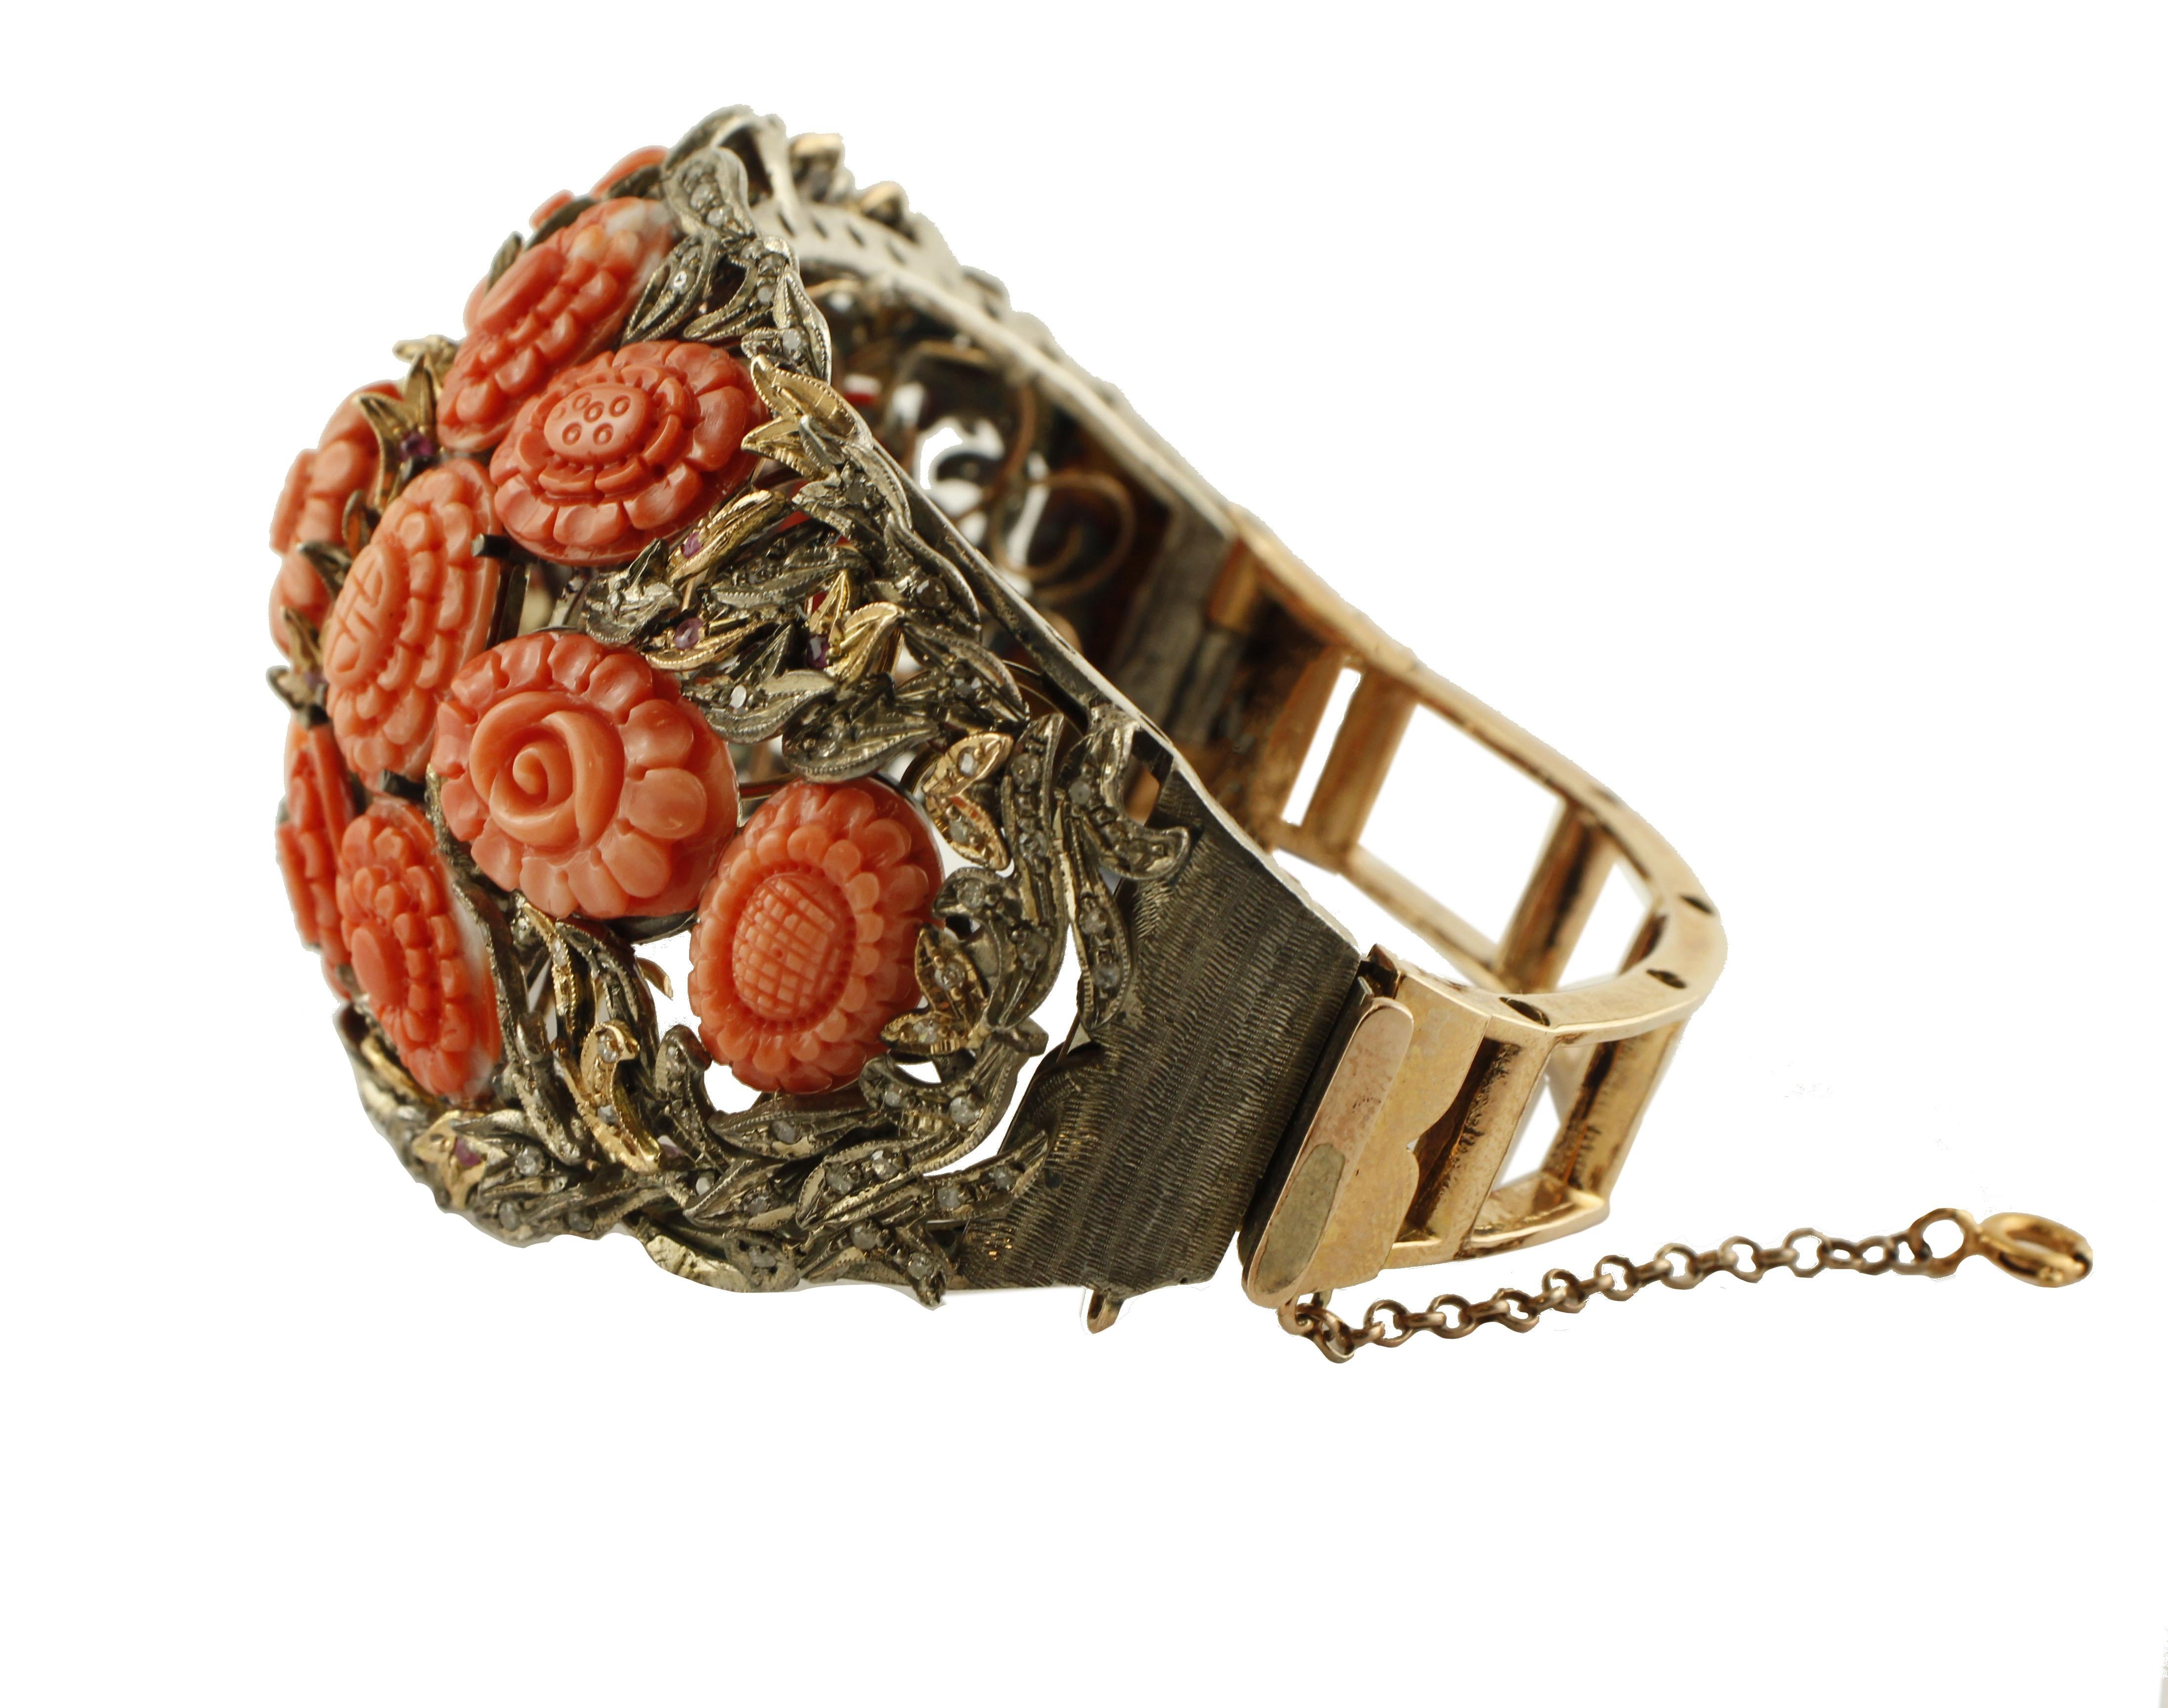 Gorgeous rigid retrò bracelet, realized in 9K rose gold and silver mounted with 9.80 g of red rubrum carved coral flowers  in the center and adorned with leaved detailes studded with 1.75 ct of little diamonds and 0.27 ct of little rubies.
Diamonds